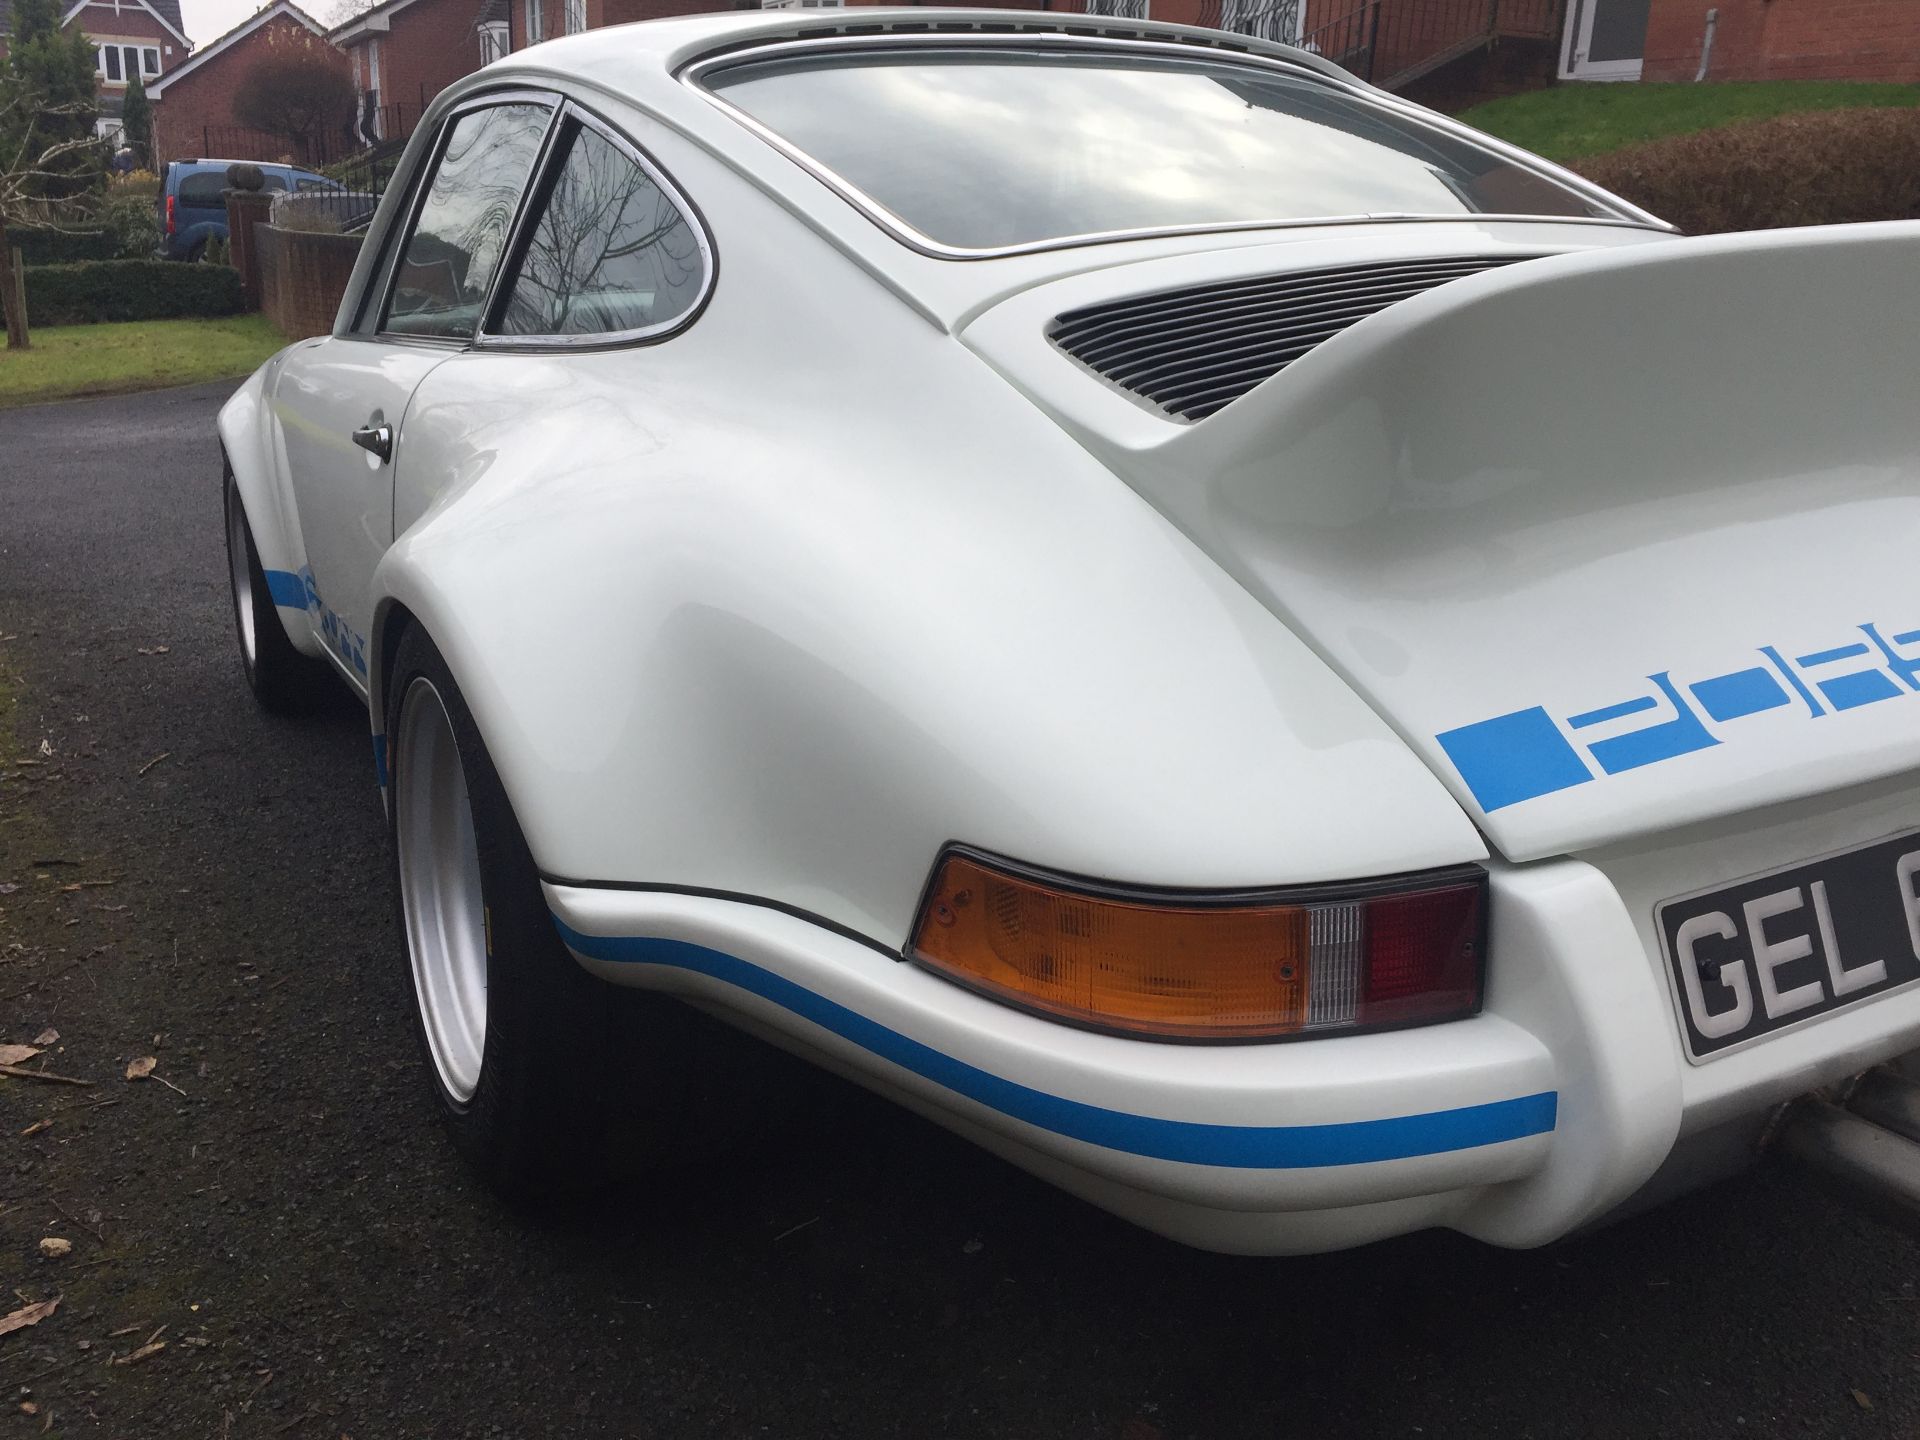 Porsche 911 Carrera 2.7 Rs Recreation - Pro 9 Build Based On A 1986 Porsche 911 **Reserve reduced** - Image 20 of 21